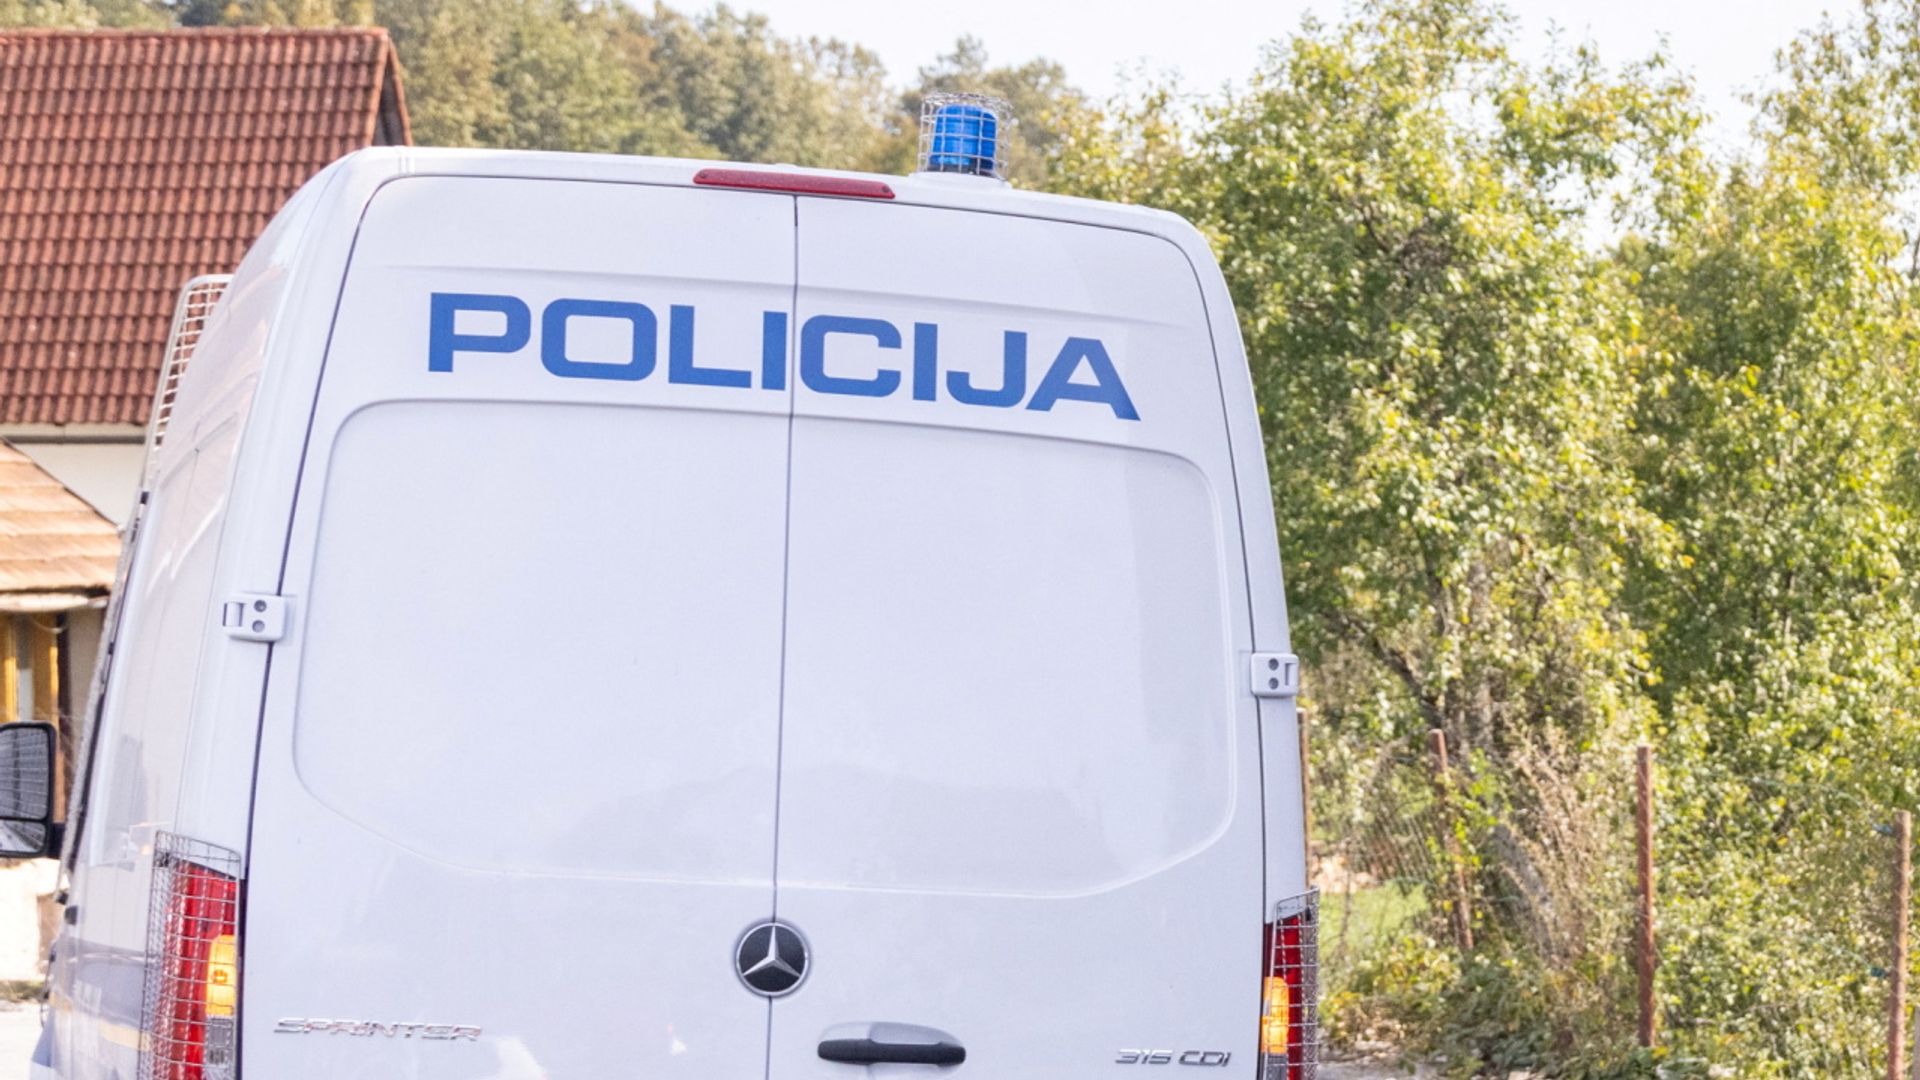 Several killed and wounded after gunman opens fire in care home in Croatia